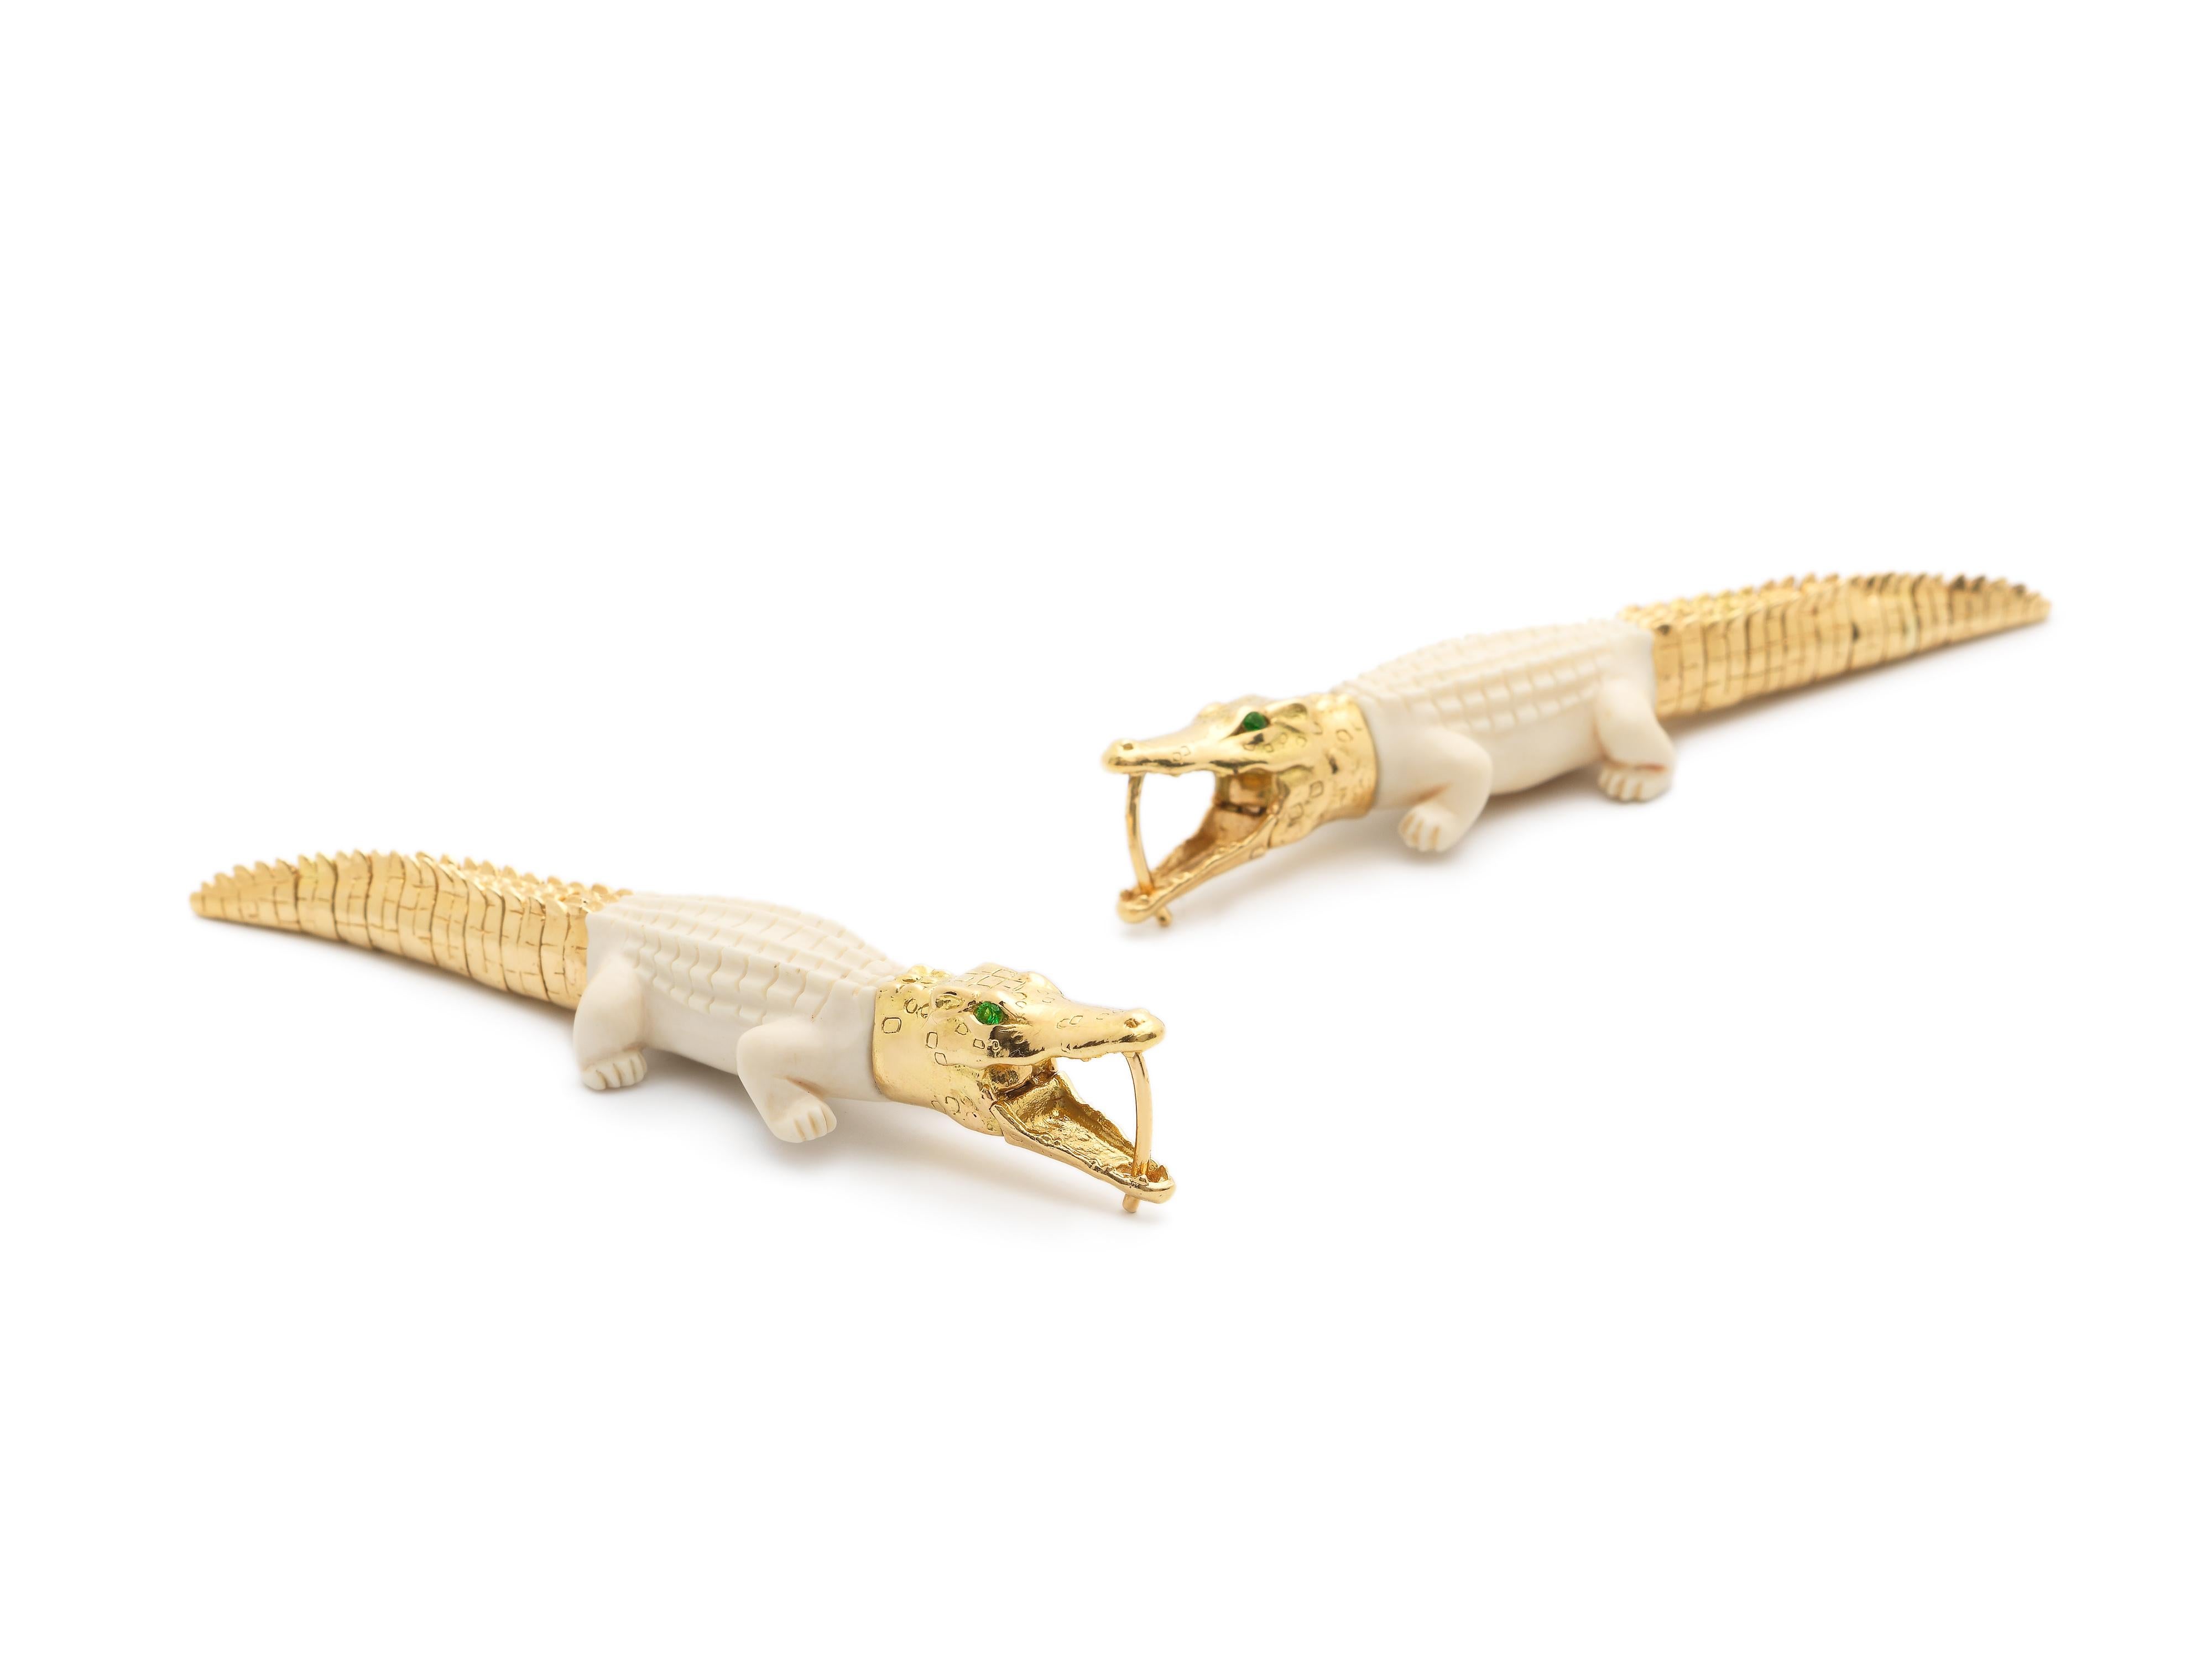 Intricately carved to replicate an alligator’s body in miniature, these earrings convey a fierce glamour. The earrings are designed in 18k yellow gold and 60,000-year-old mammoth tusk, with the alligator’s mouth acting as the earrings’ closing